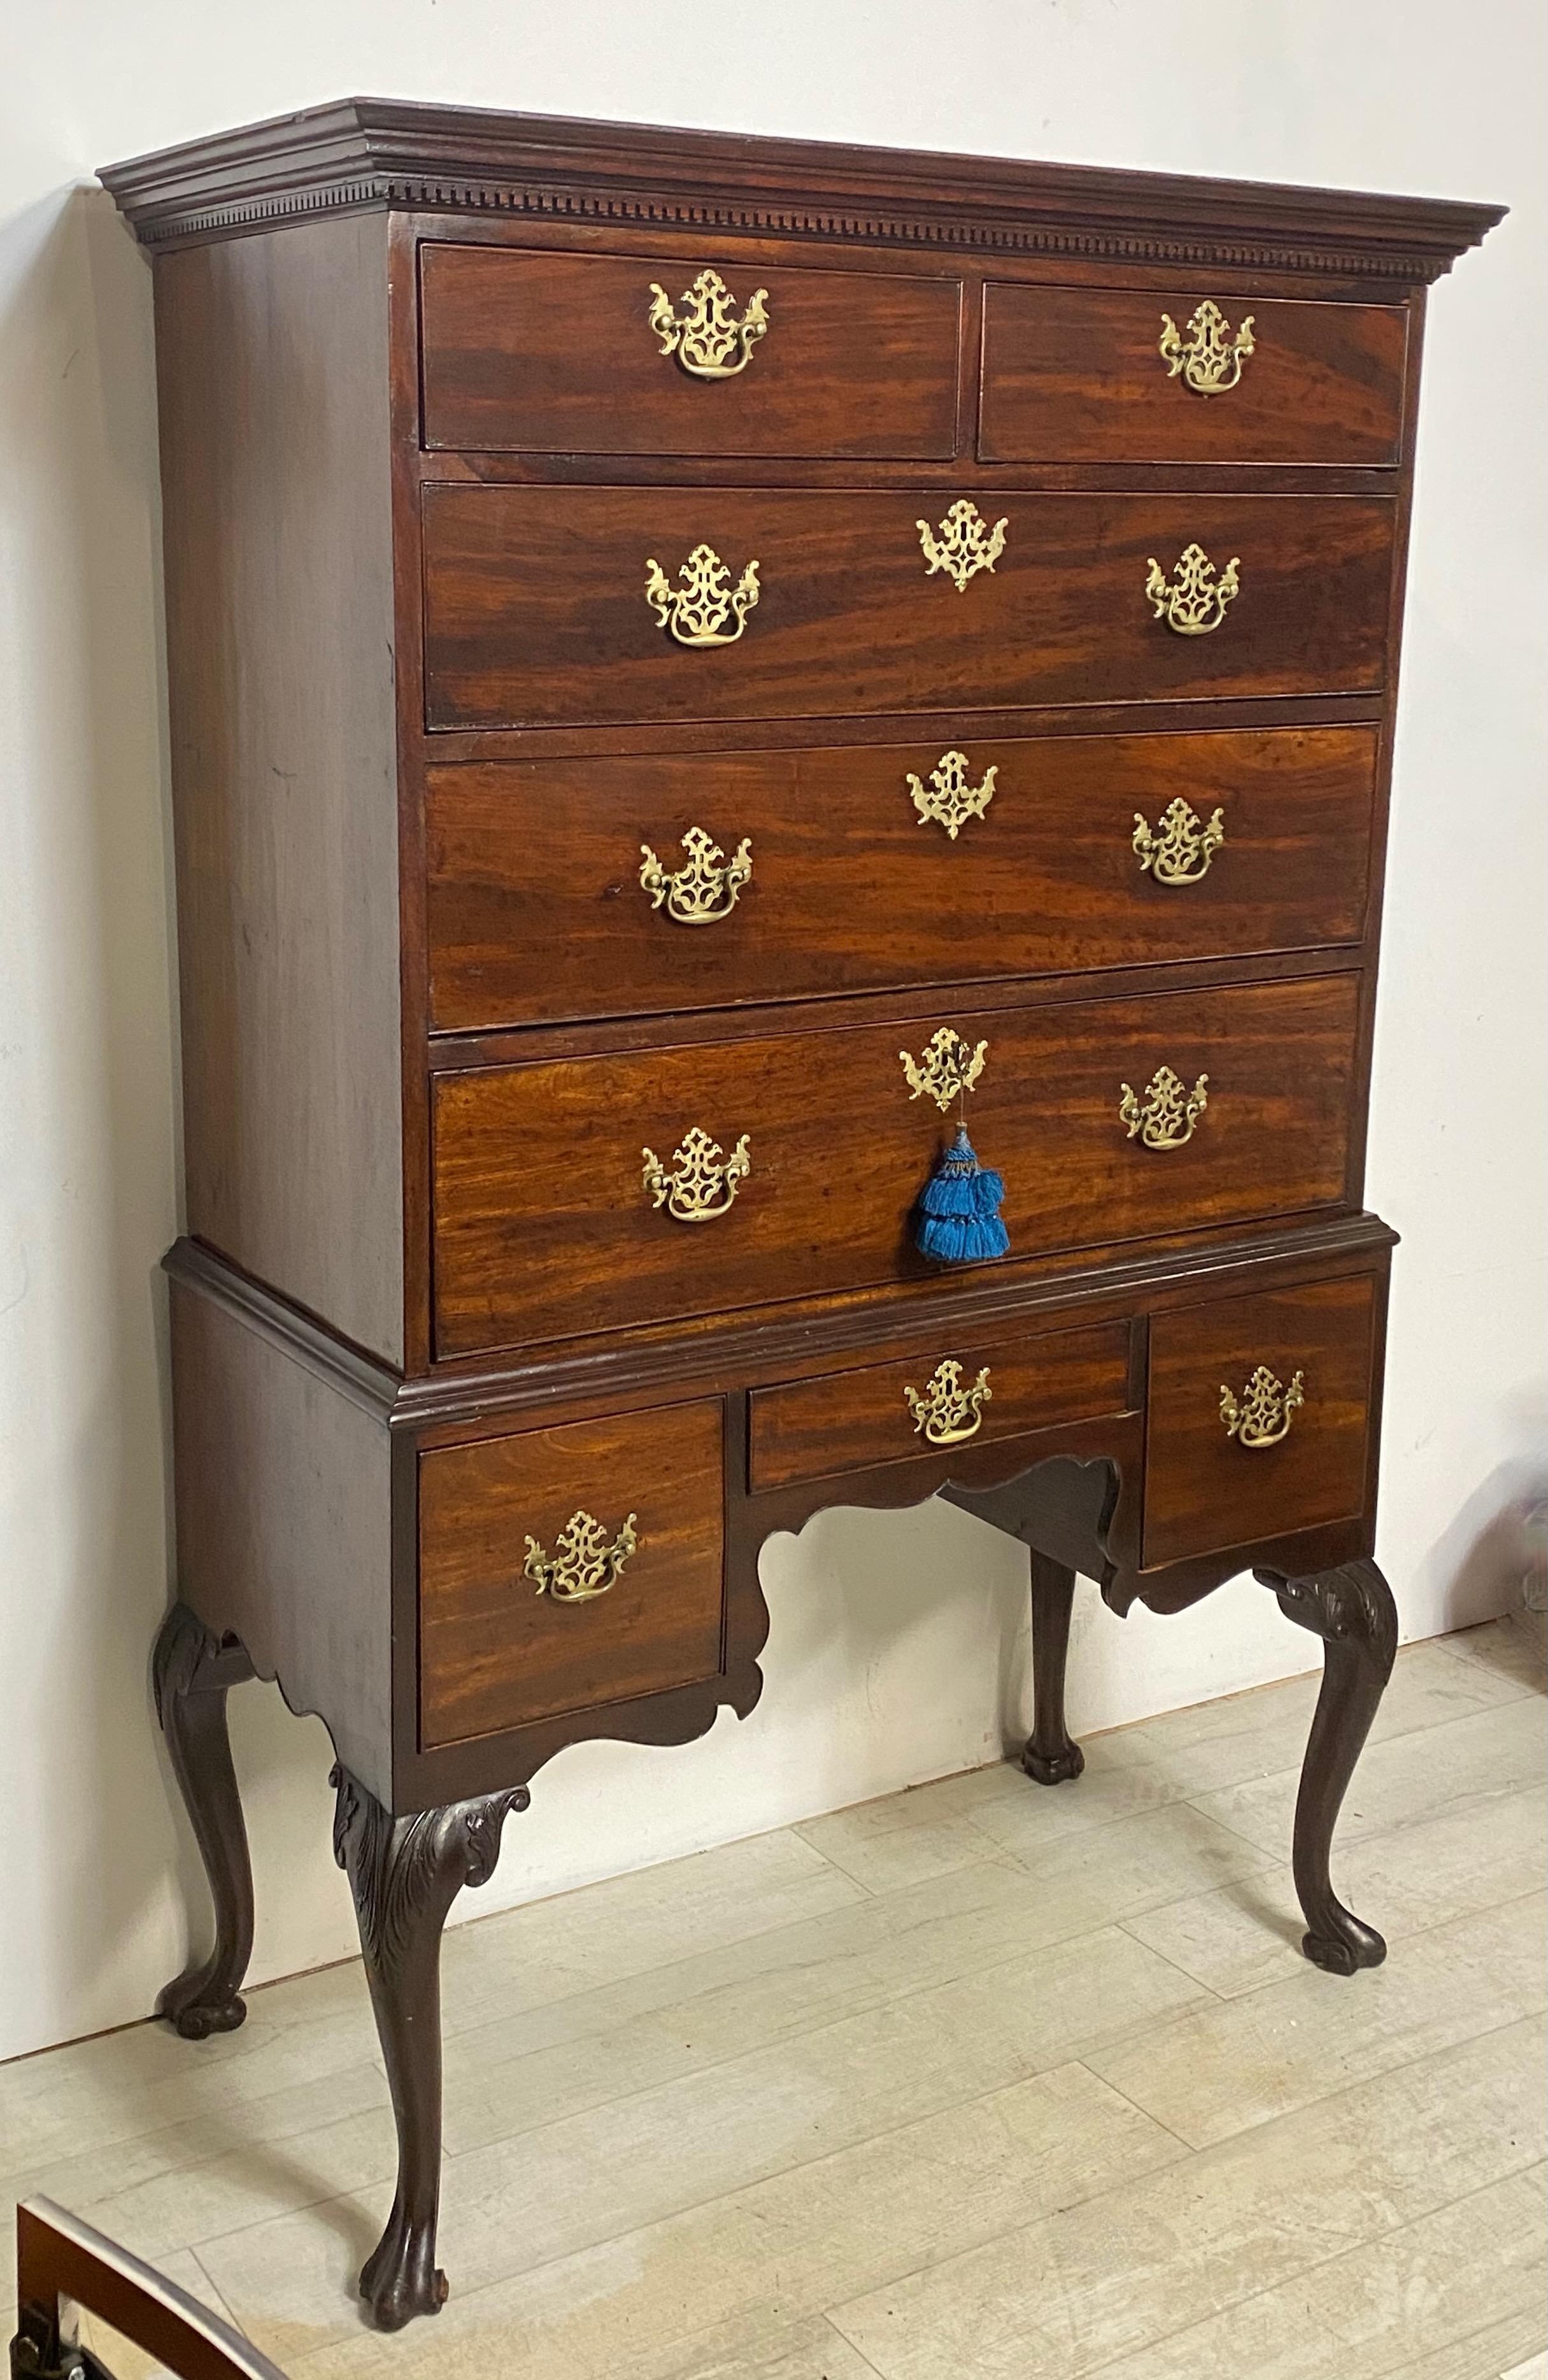 A late 18th century English Chippendale style mahogany chest on stand.
In remarkable antique condition, excellent quality, and having an unusual Spanish foot detail.
England, circa 1790.